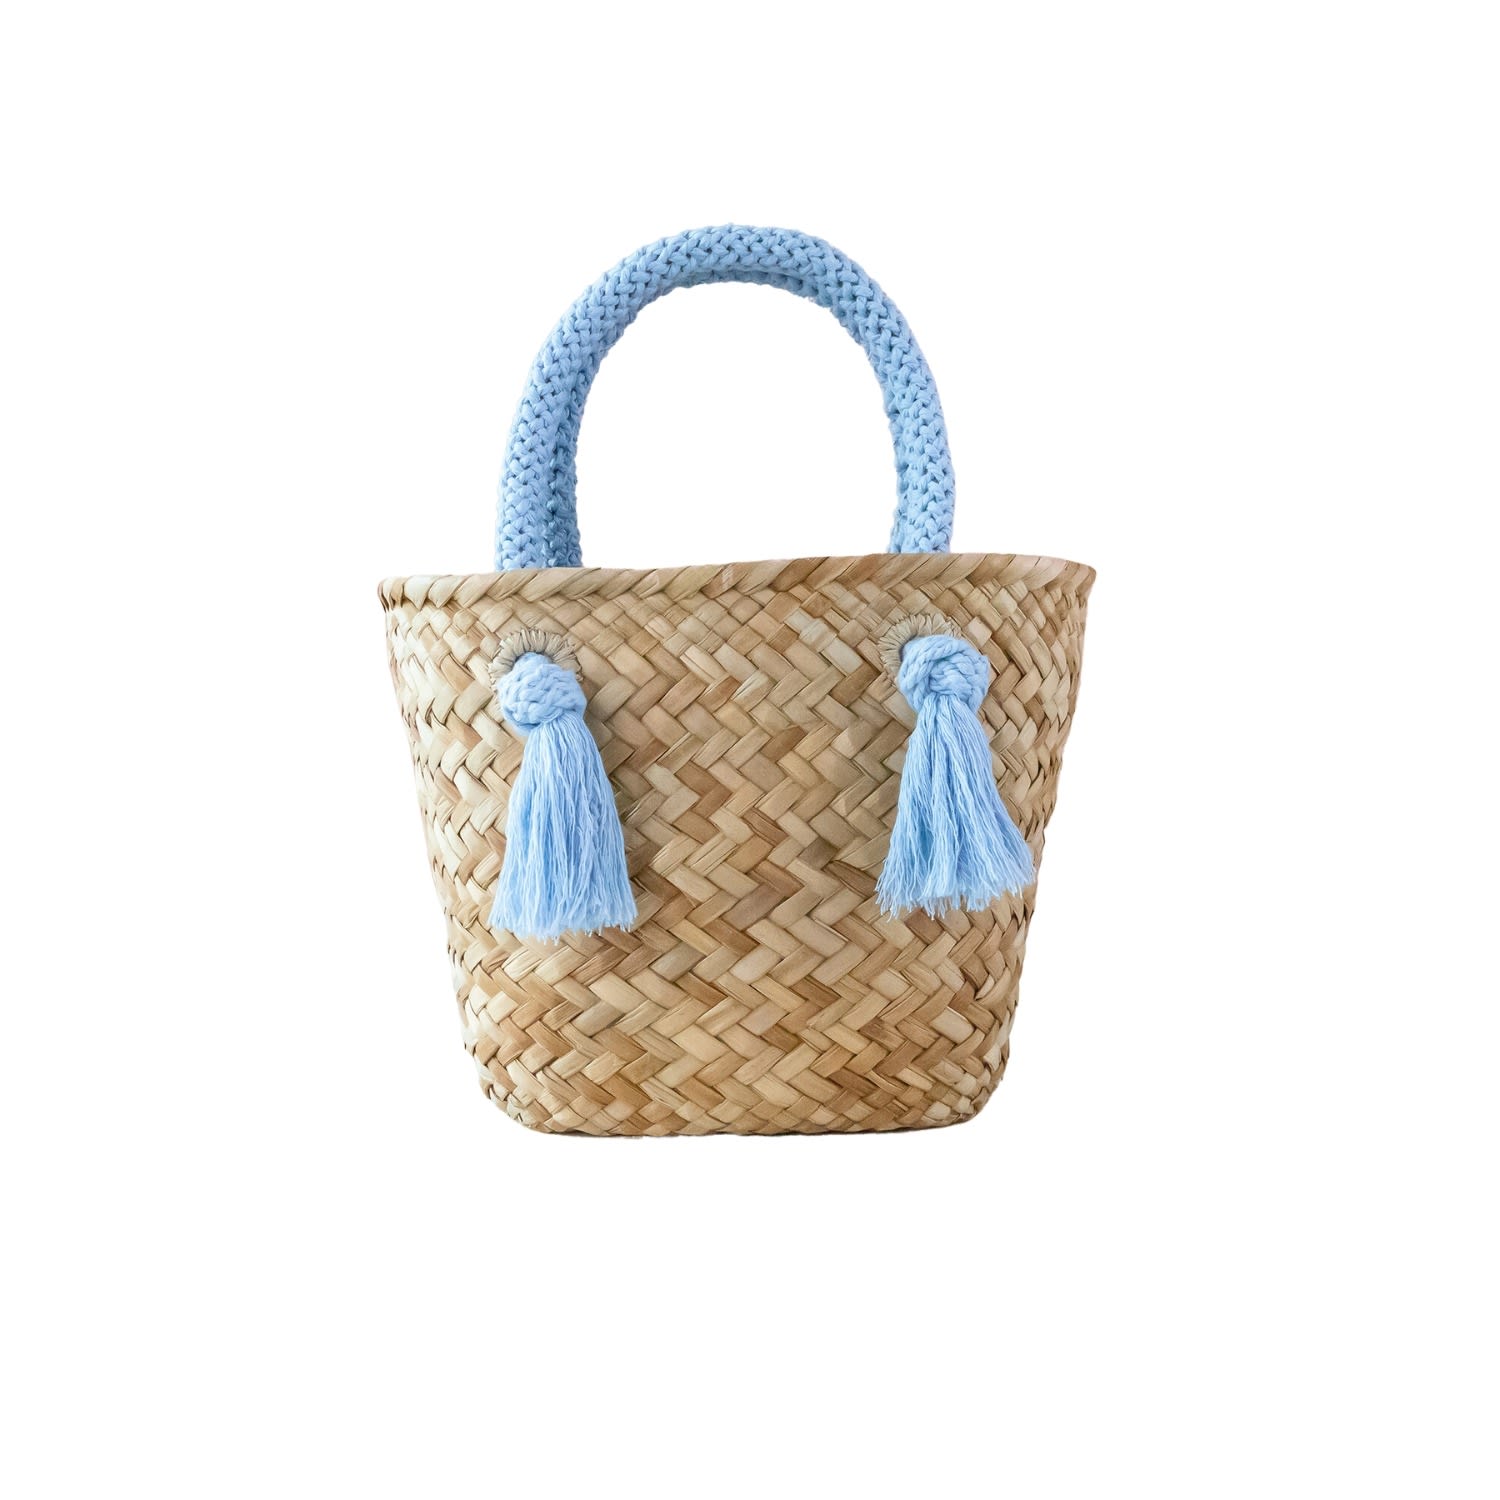 Women’s Powder Blue Small Classic Tote Bag With Braided Handles LikhÃ¢